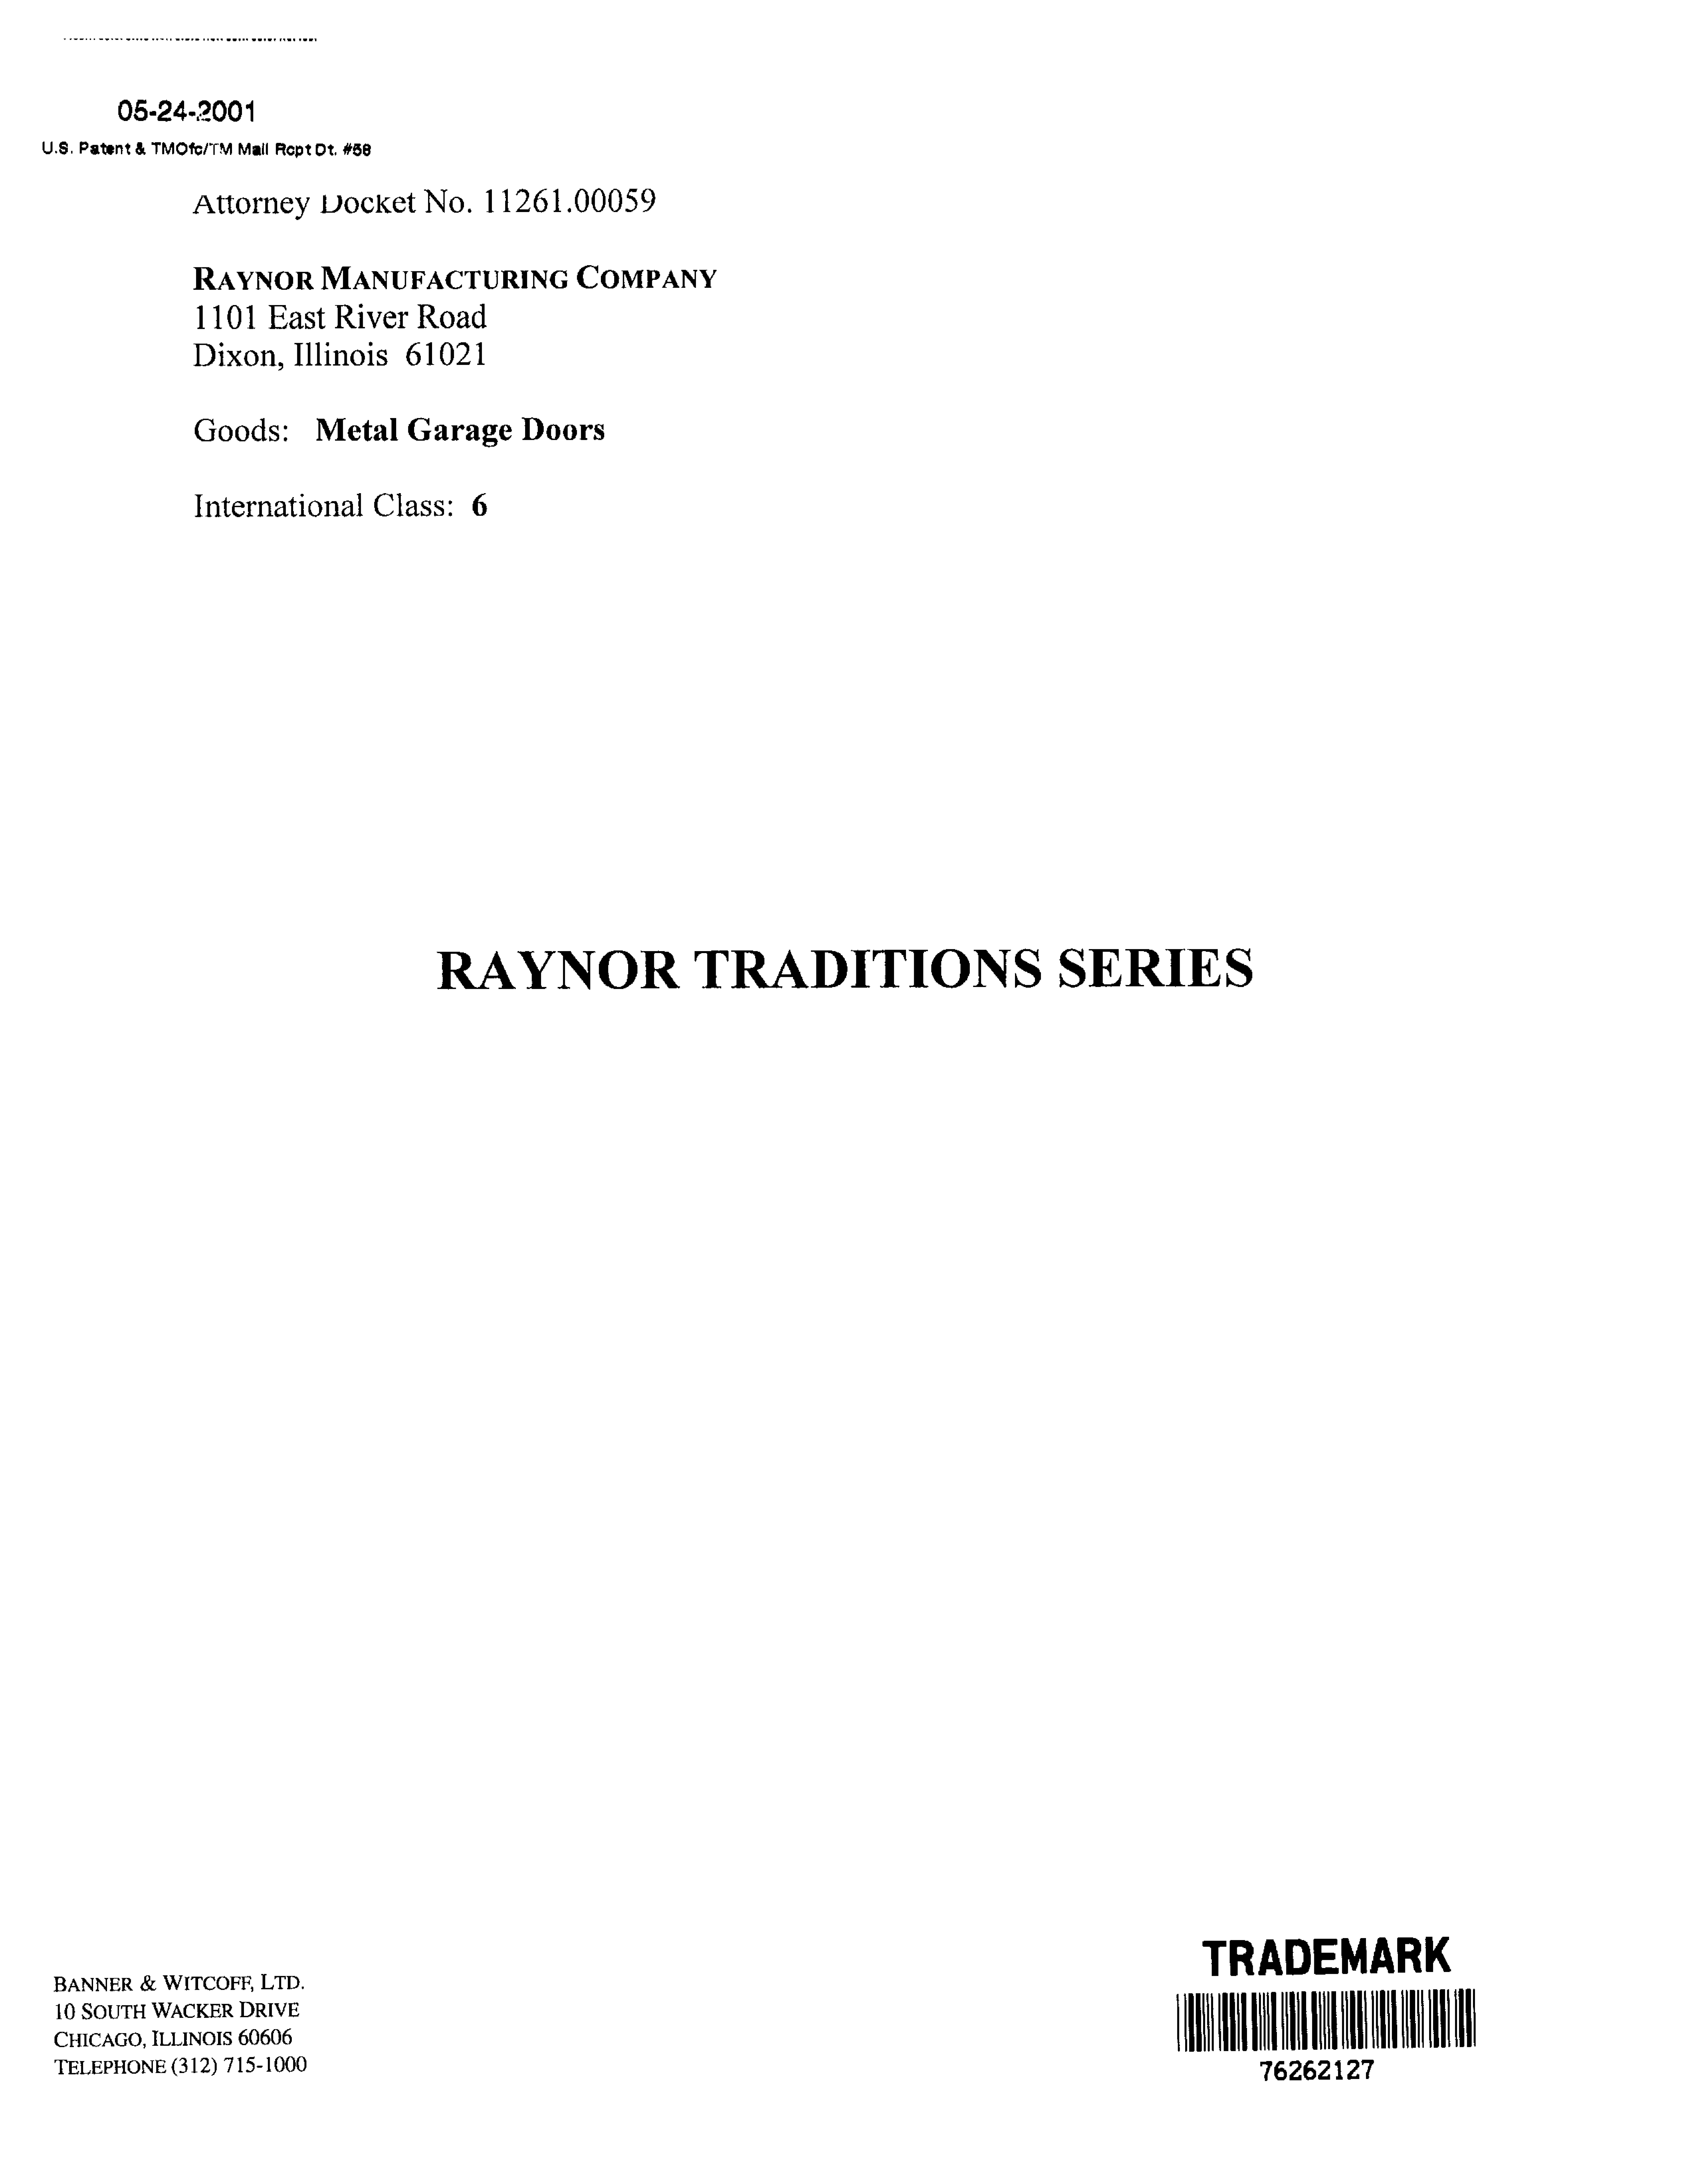  RAYNOR TRADITIONS SERIES